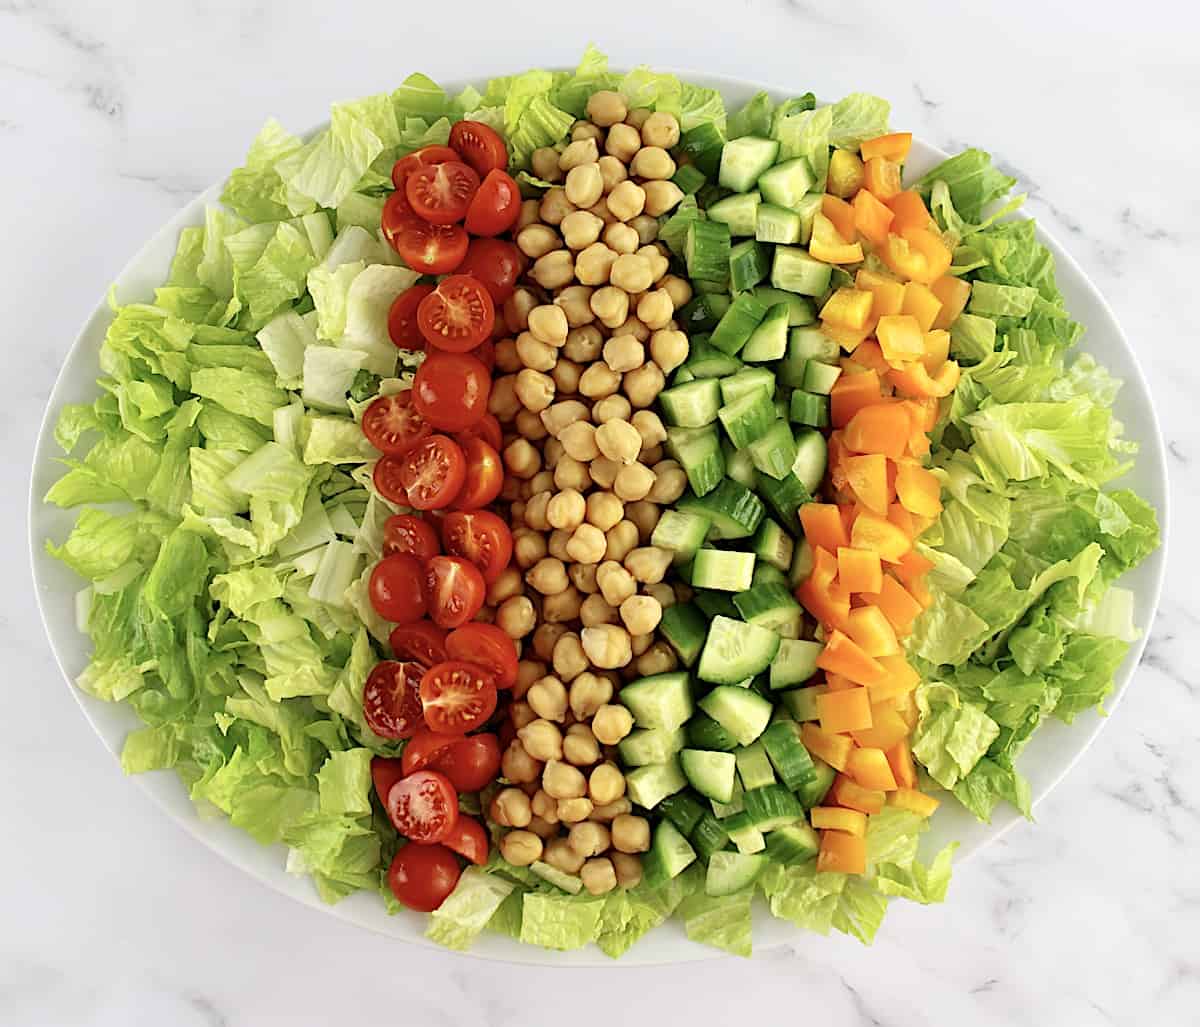 chopped lettuce in white oval platter with chickpeas and chopped cucumber, orange peppers and halved tomatoes down the center